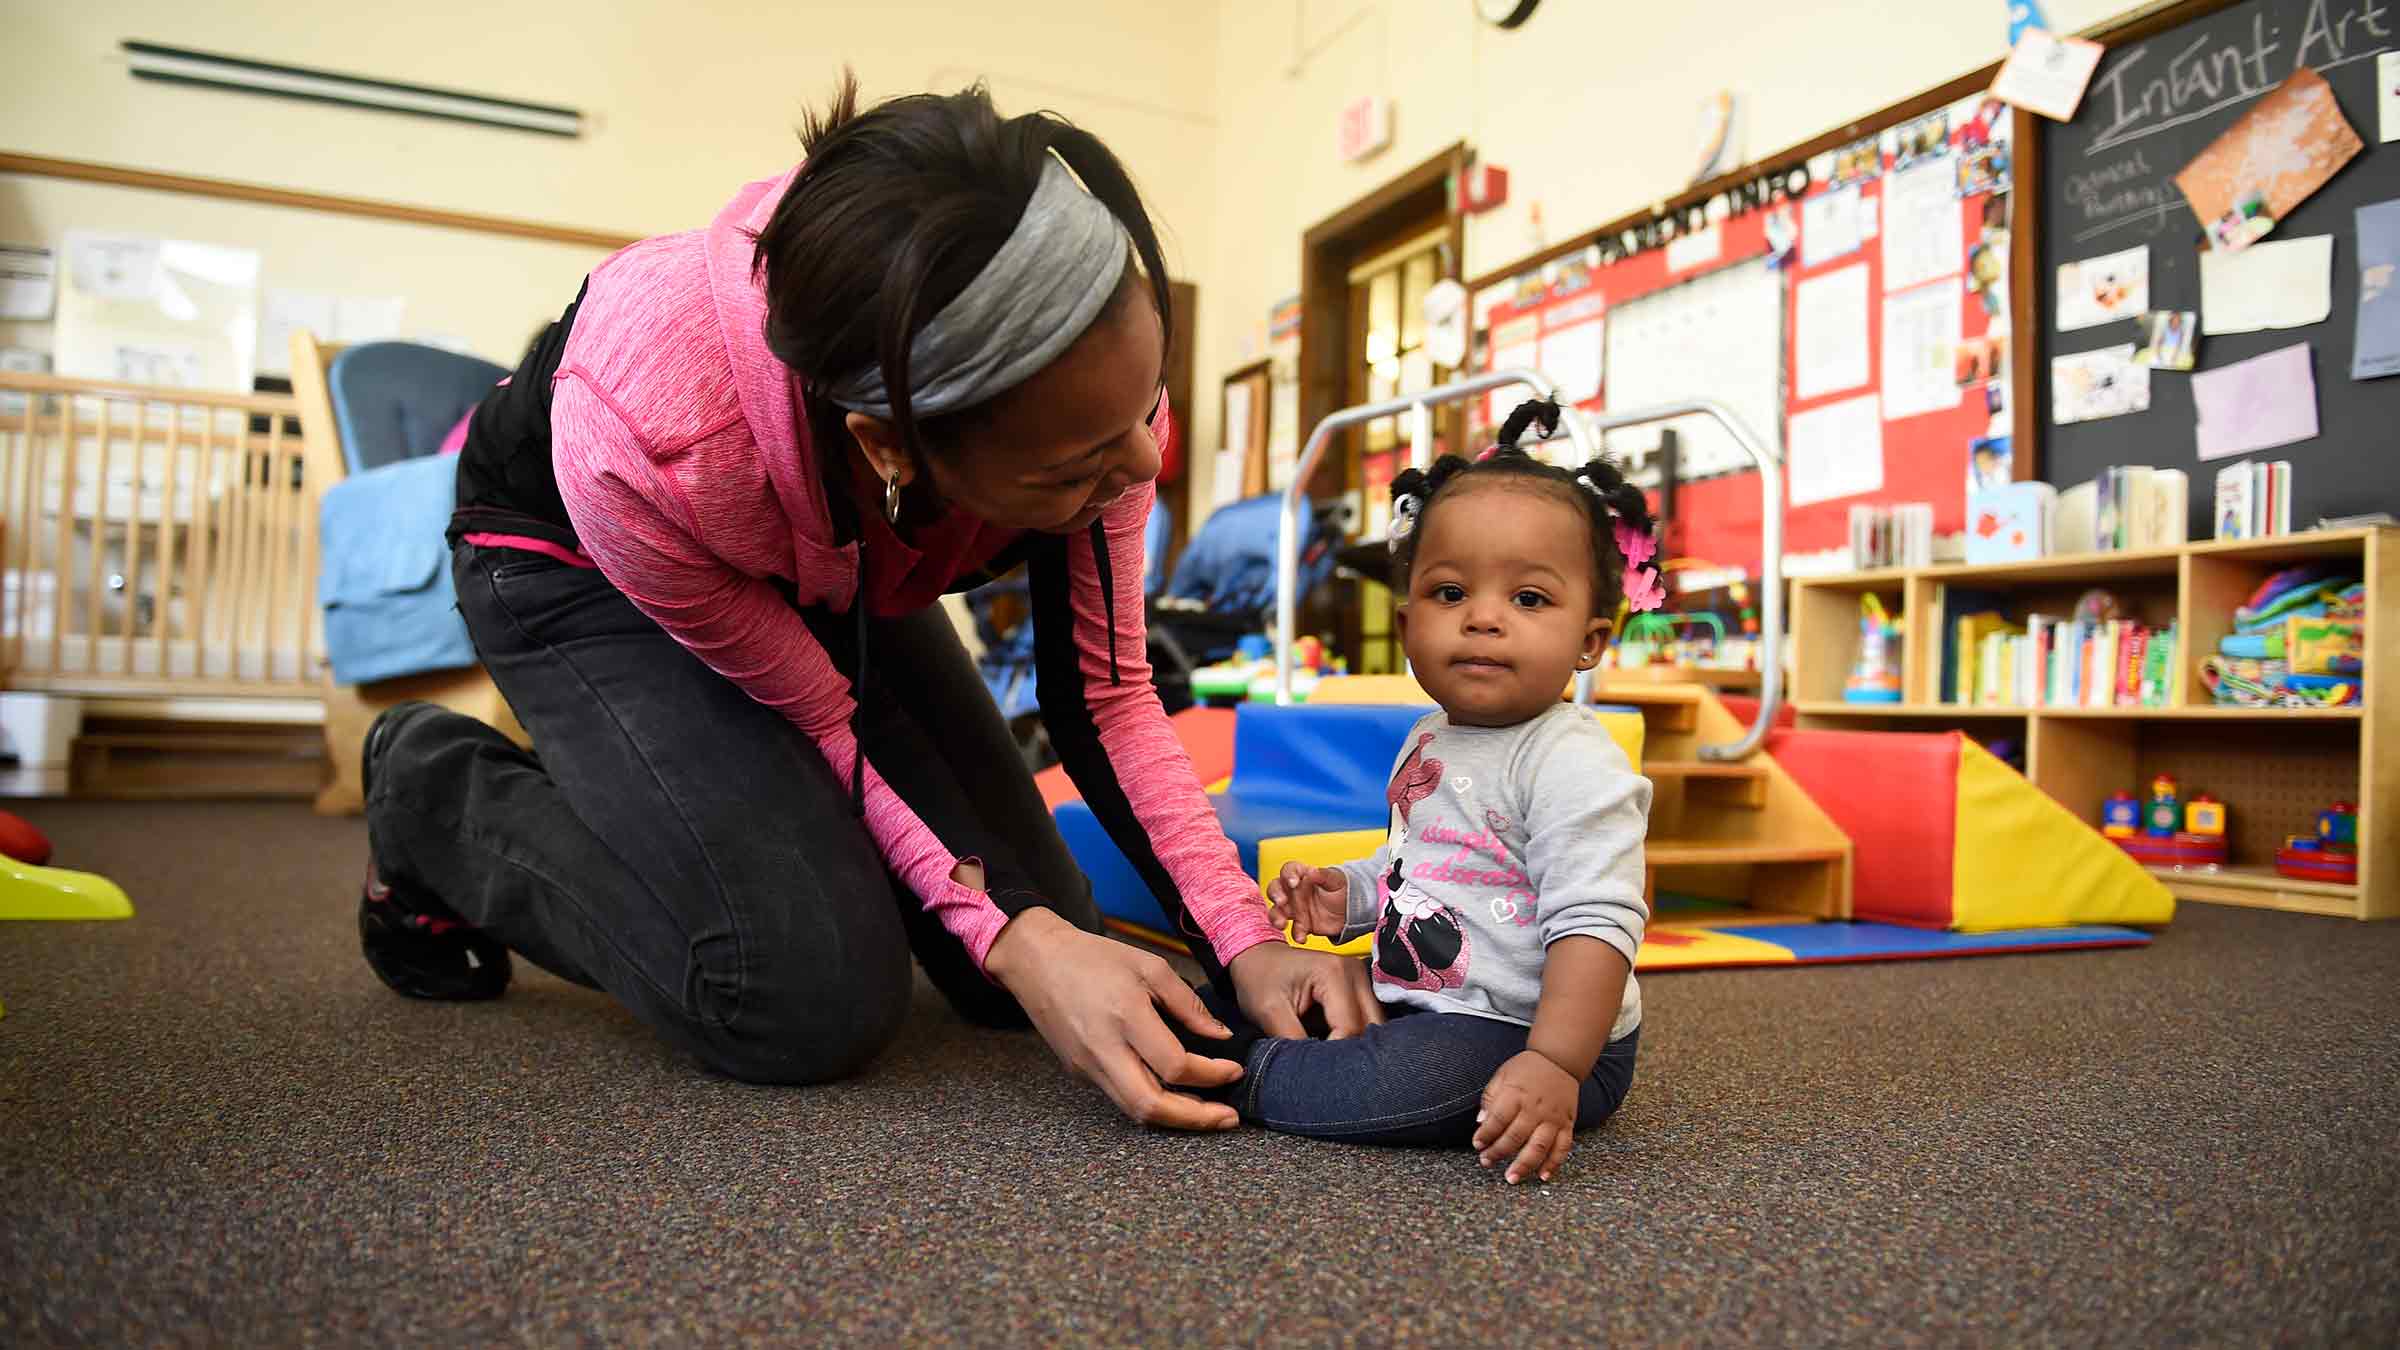 A mother is gazing affectionately at her child who is seated inside a preschool classroom